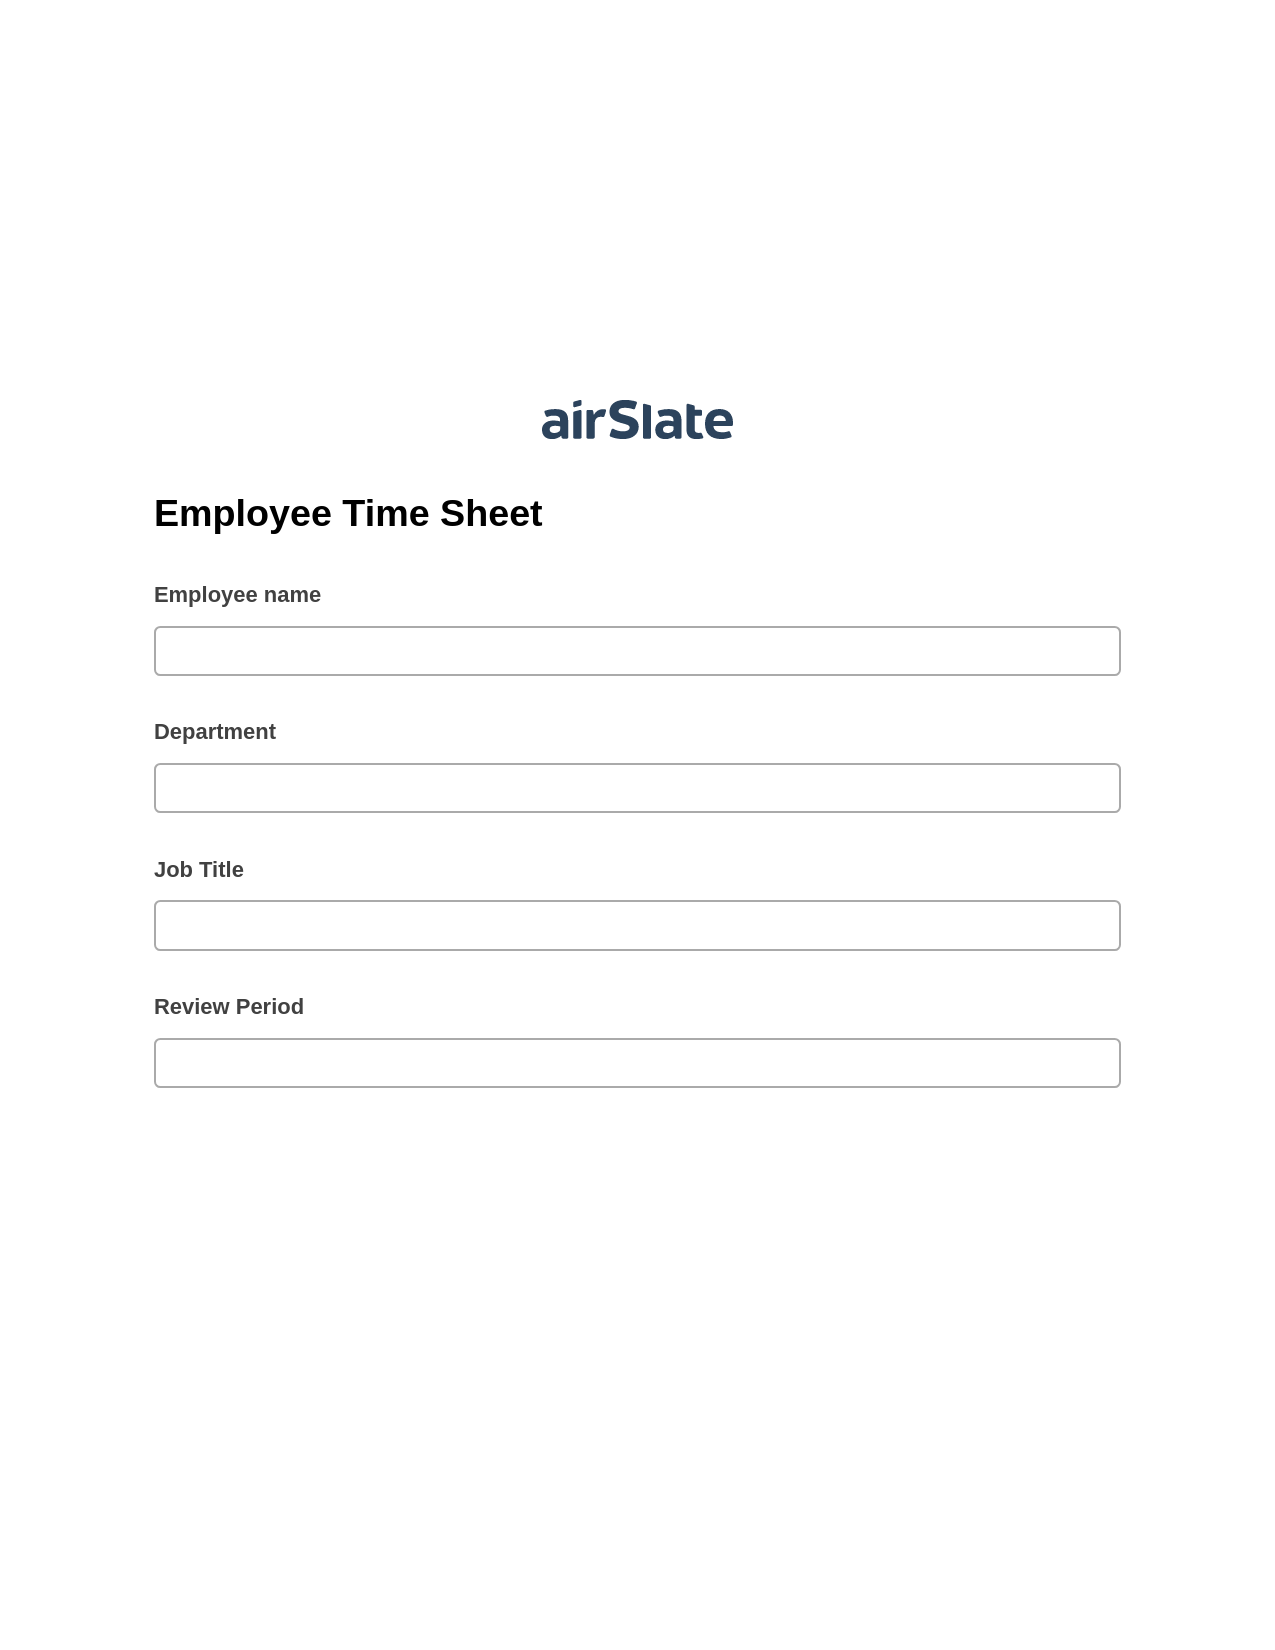 Employee Time Sheet Pre-fill from another Slate Bot, Export to MS Dynamics 365 Bot, Export to MySQL Bot